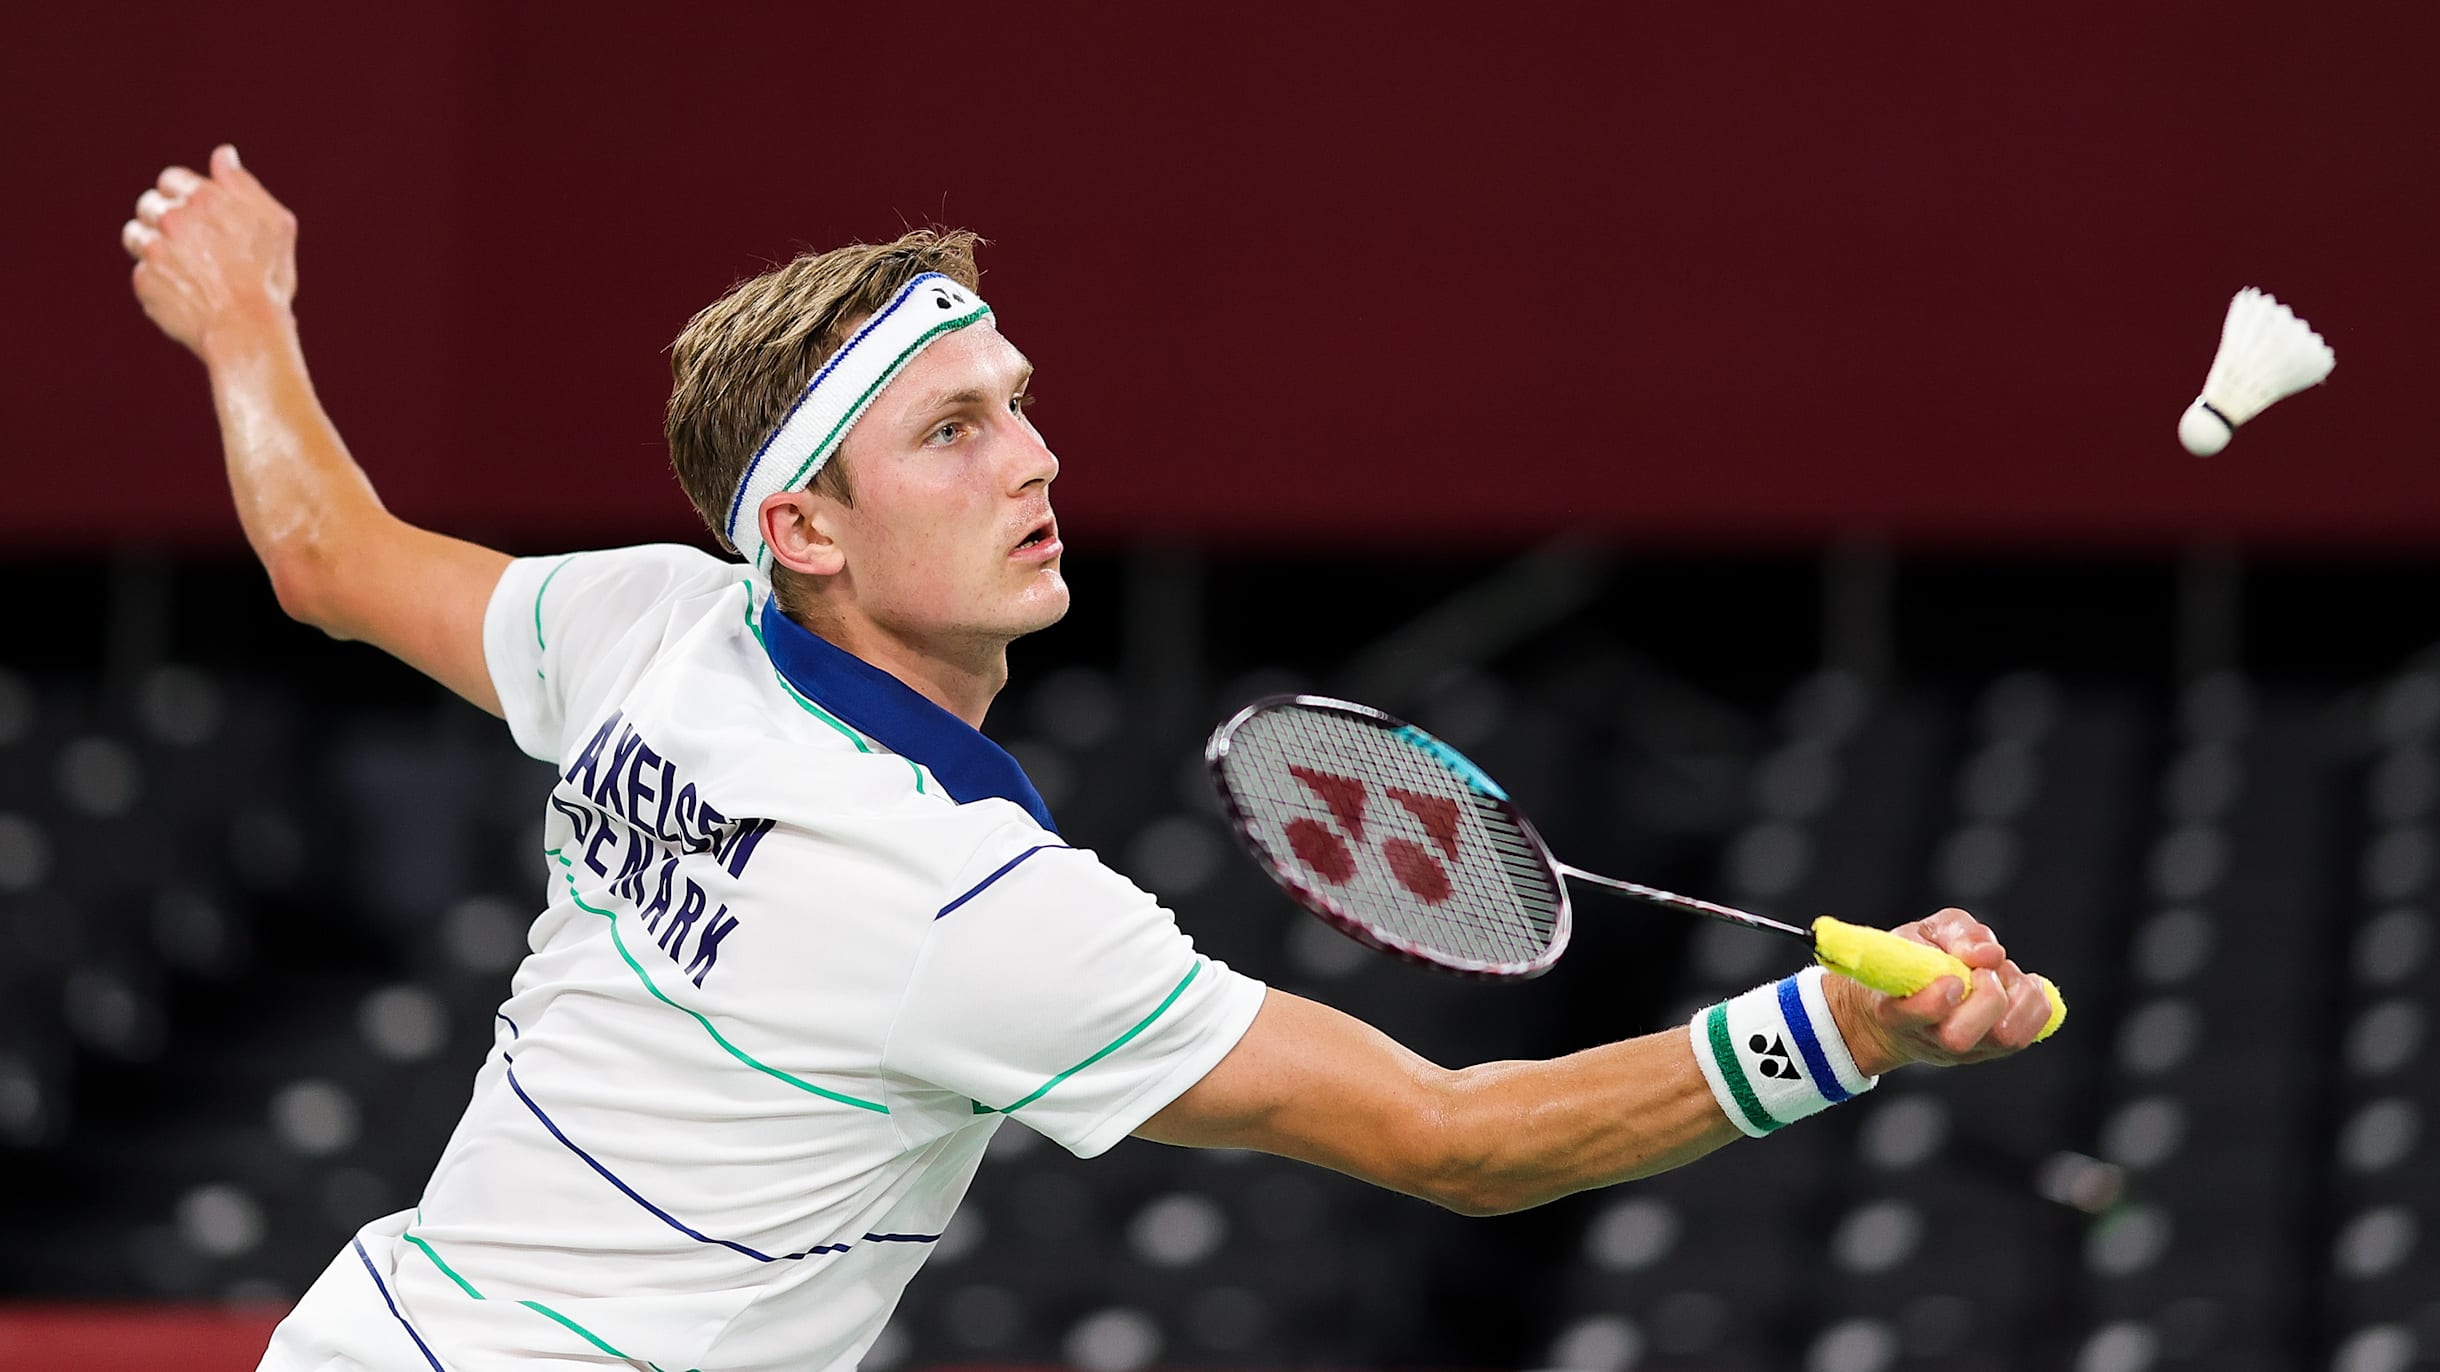 Viktor Axelsen and Anthony Ginting make winning starts at badmintons German Open